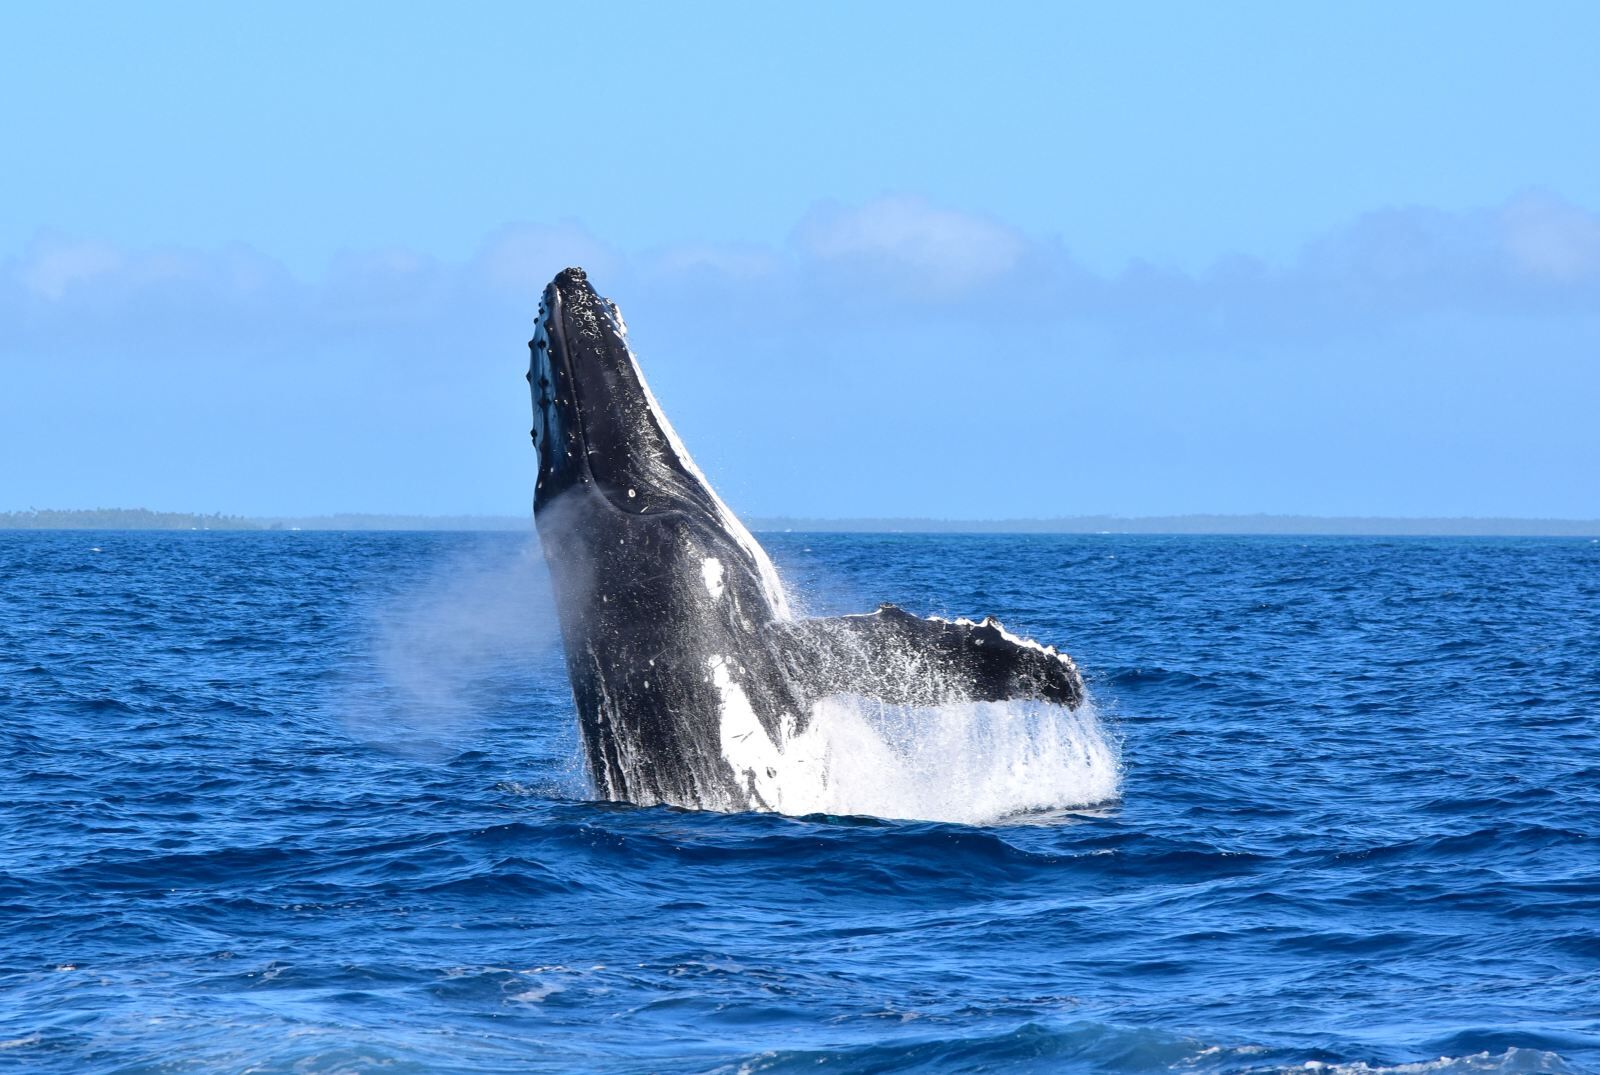 When is the Whale Season in Tonga?